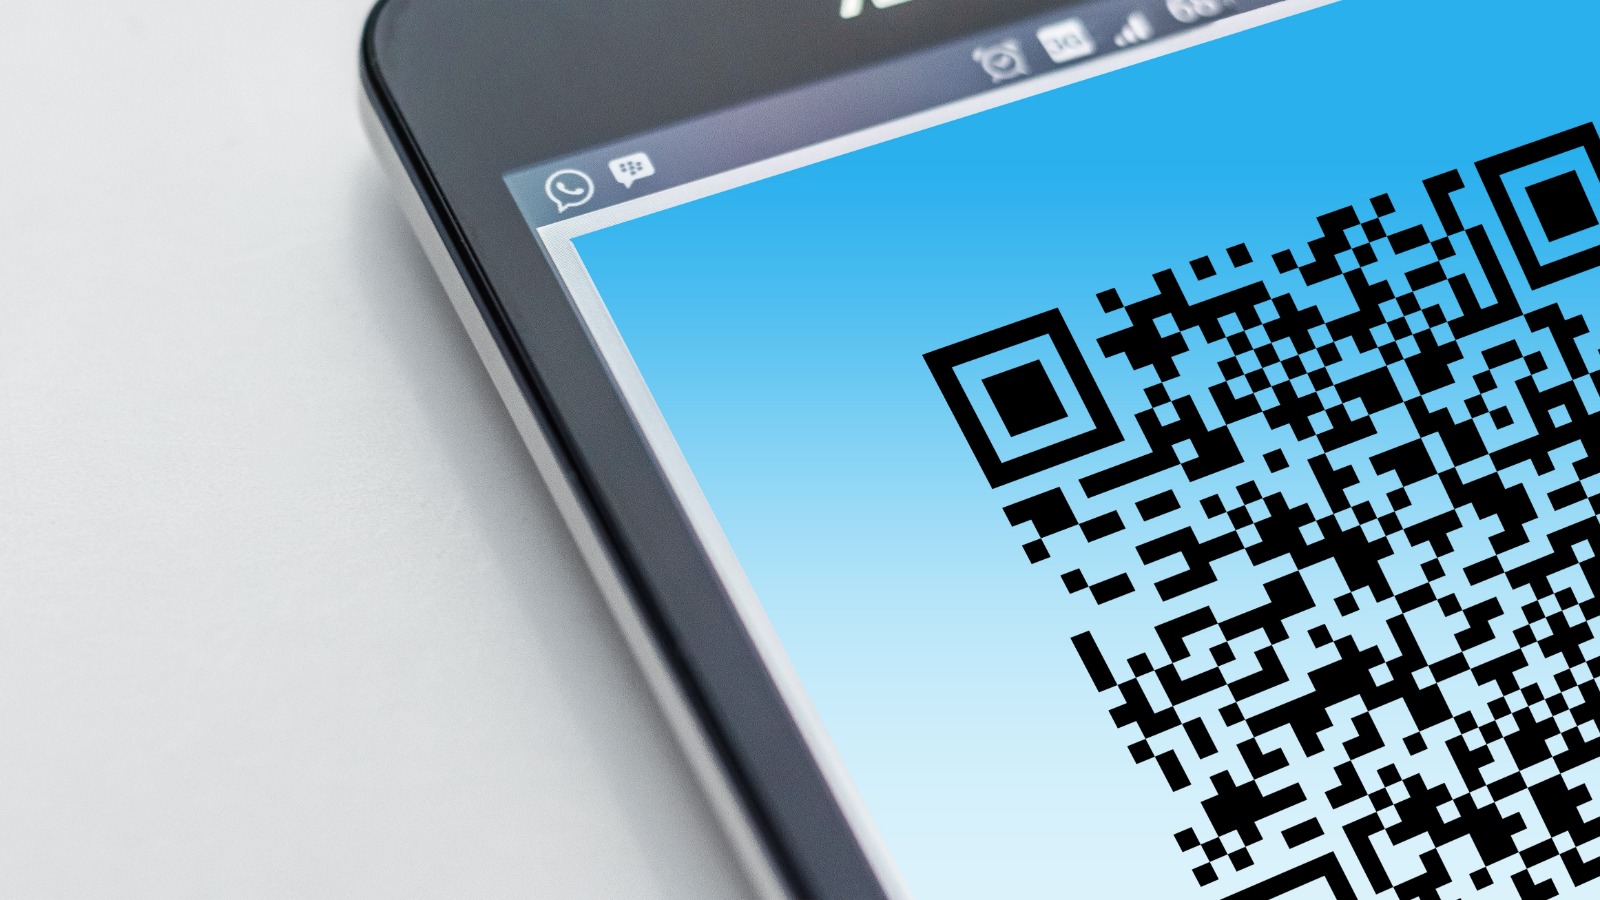 Don't fall for fraudulent QR codes, Arizona Attorney General's Office warns